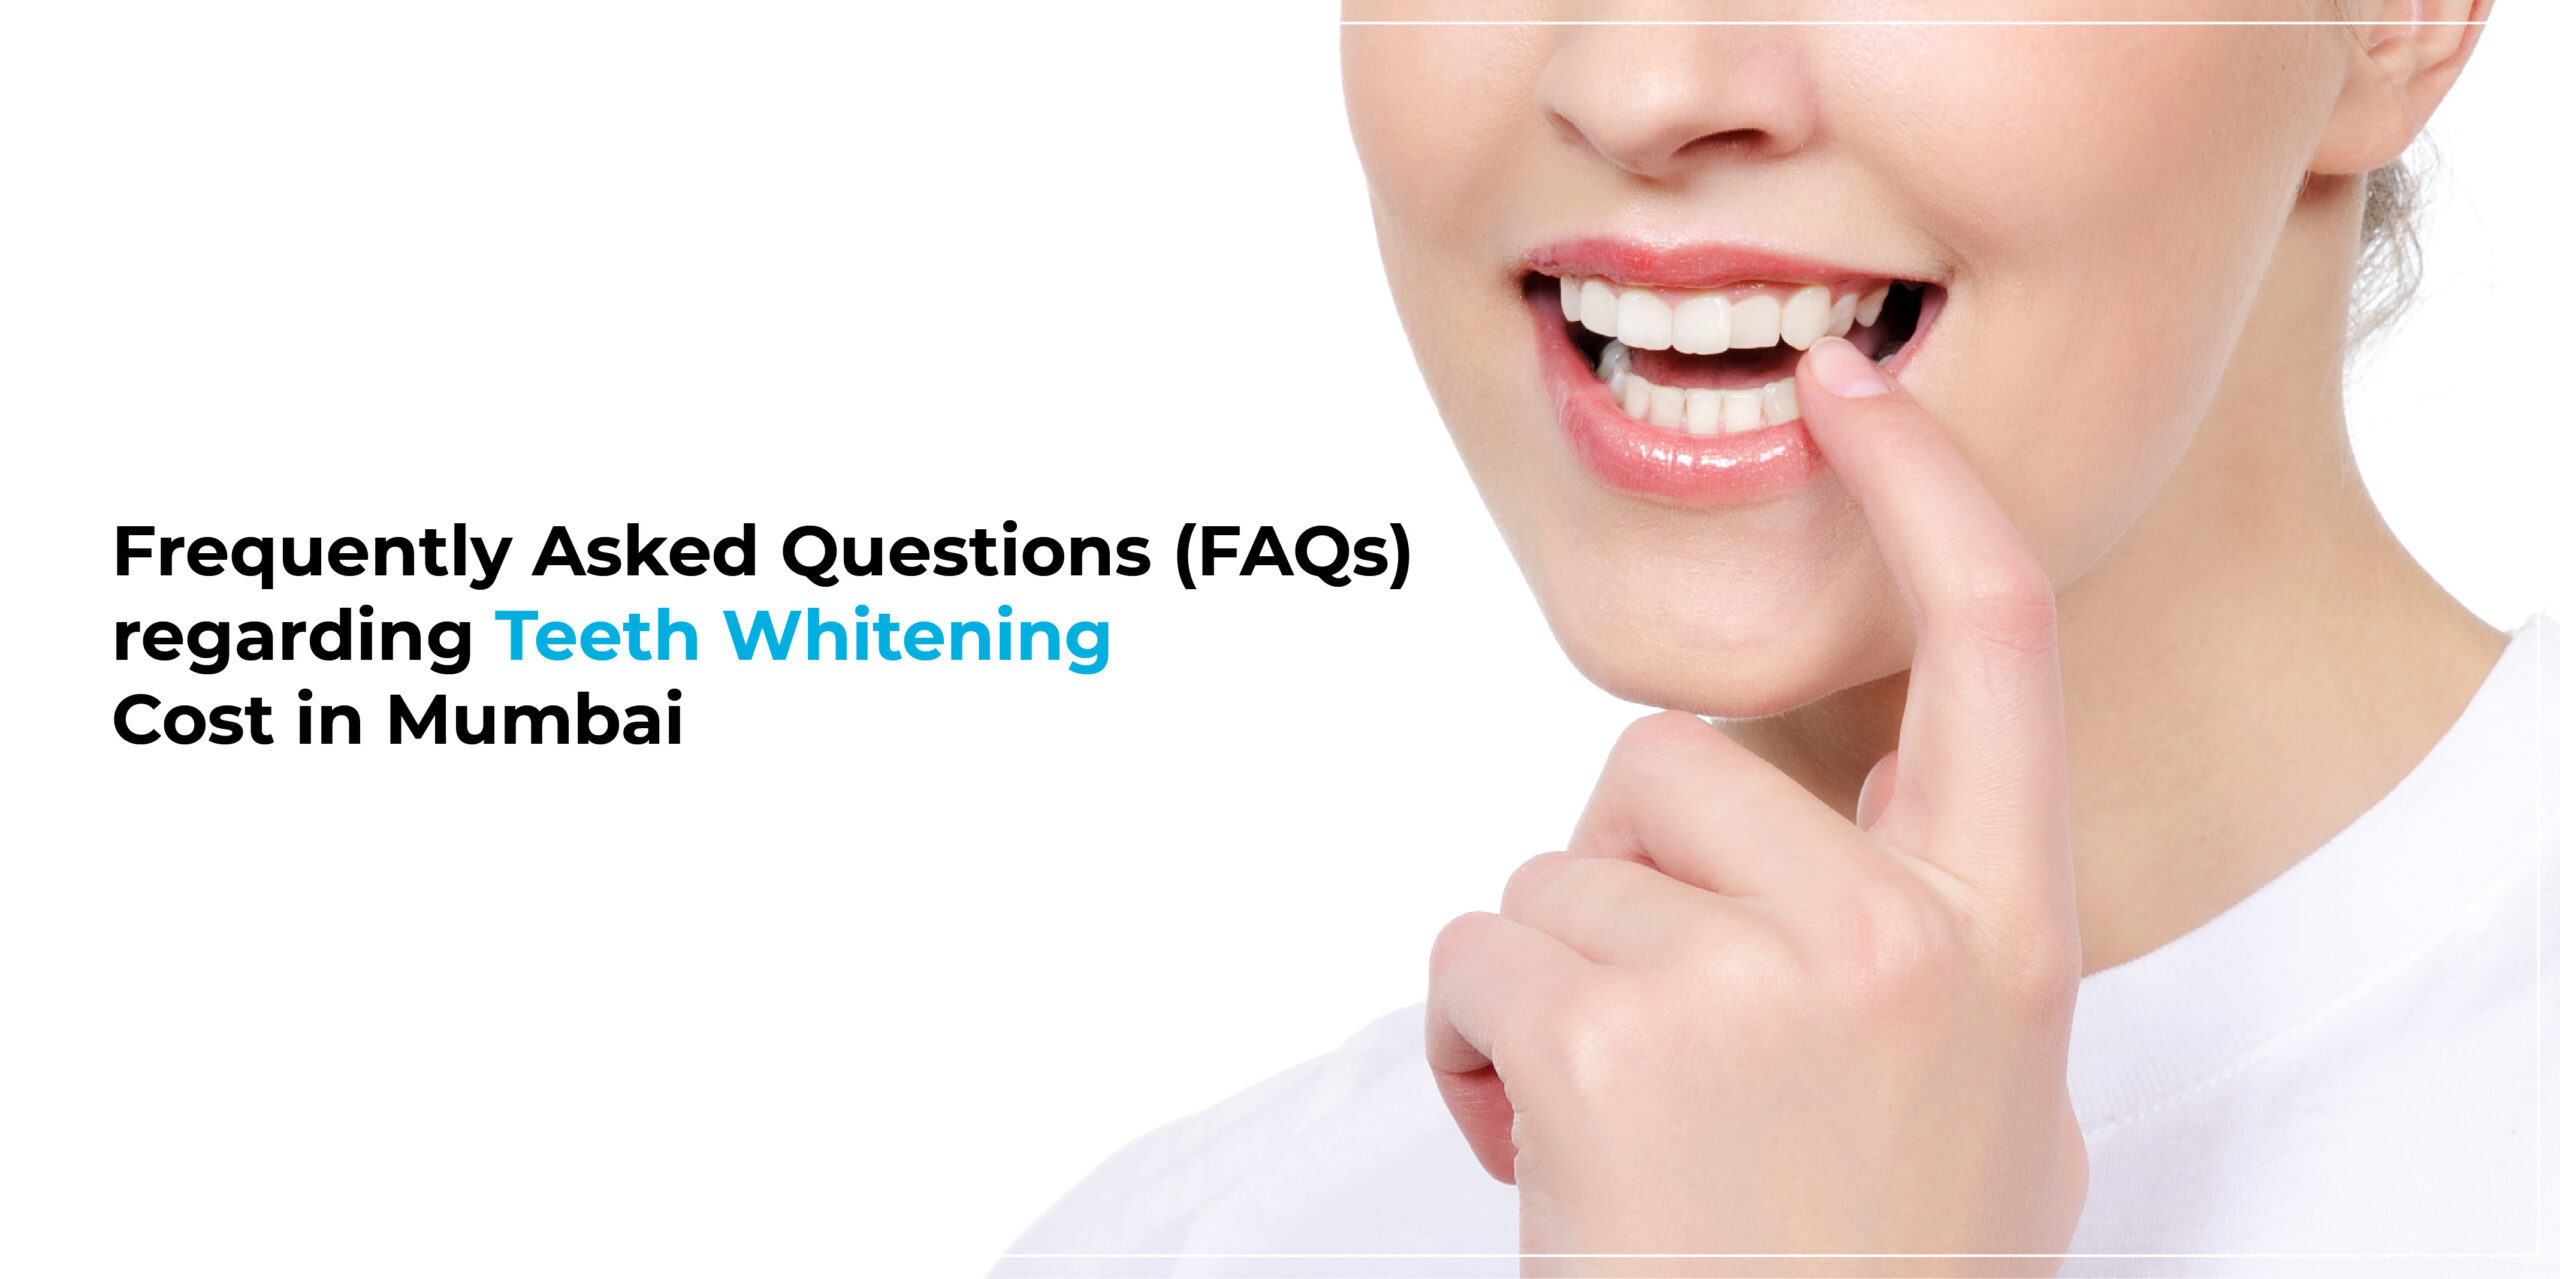 Frequently Asked Questions (FAQs) regarding Teeth Whitening Cost in Mumbai